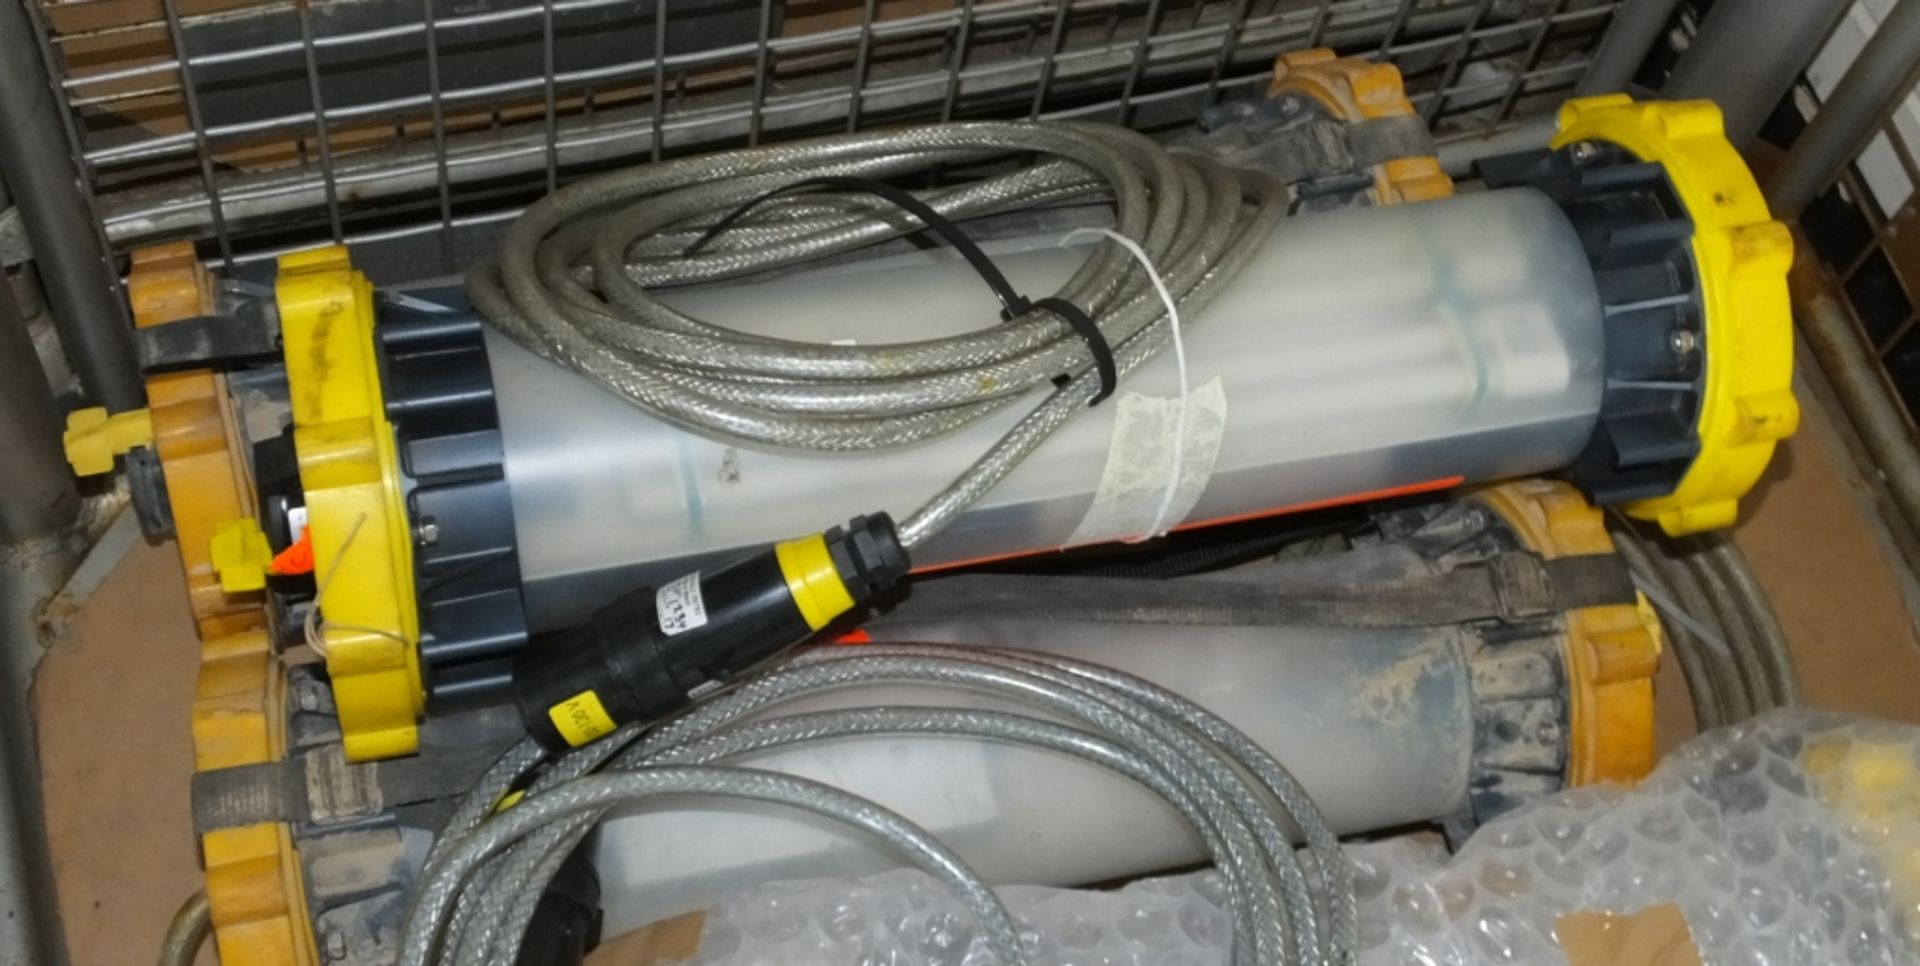 9x Wolf LL-500 - Portable Fluorescent lights - Image 2 of 3